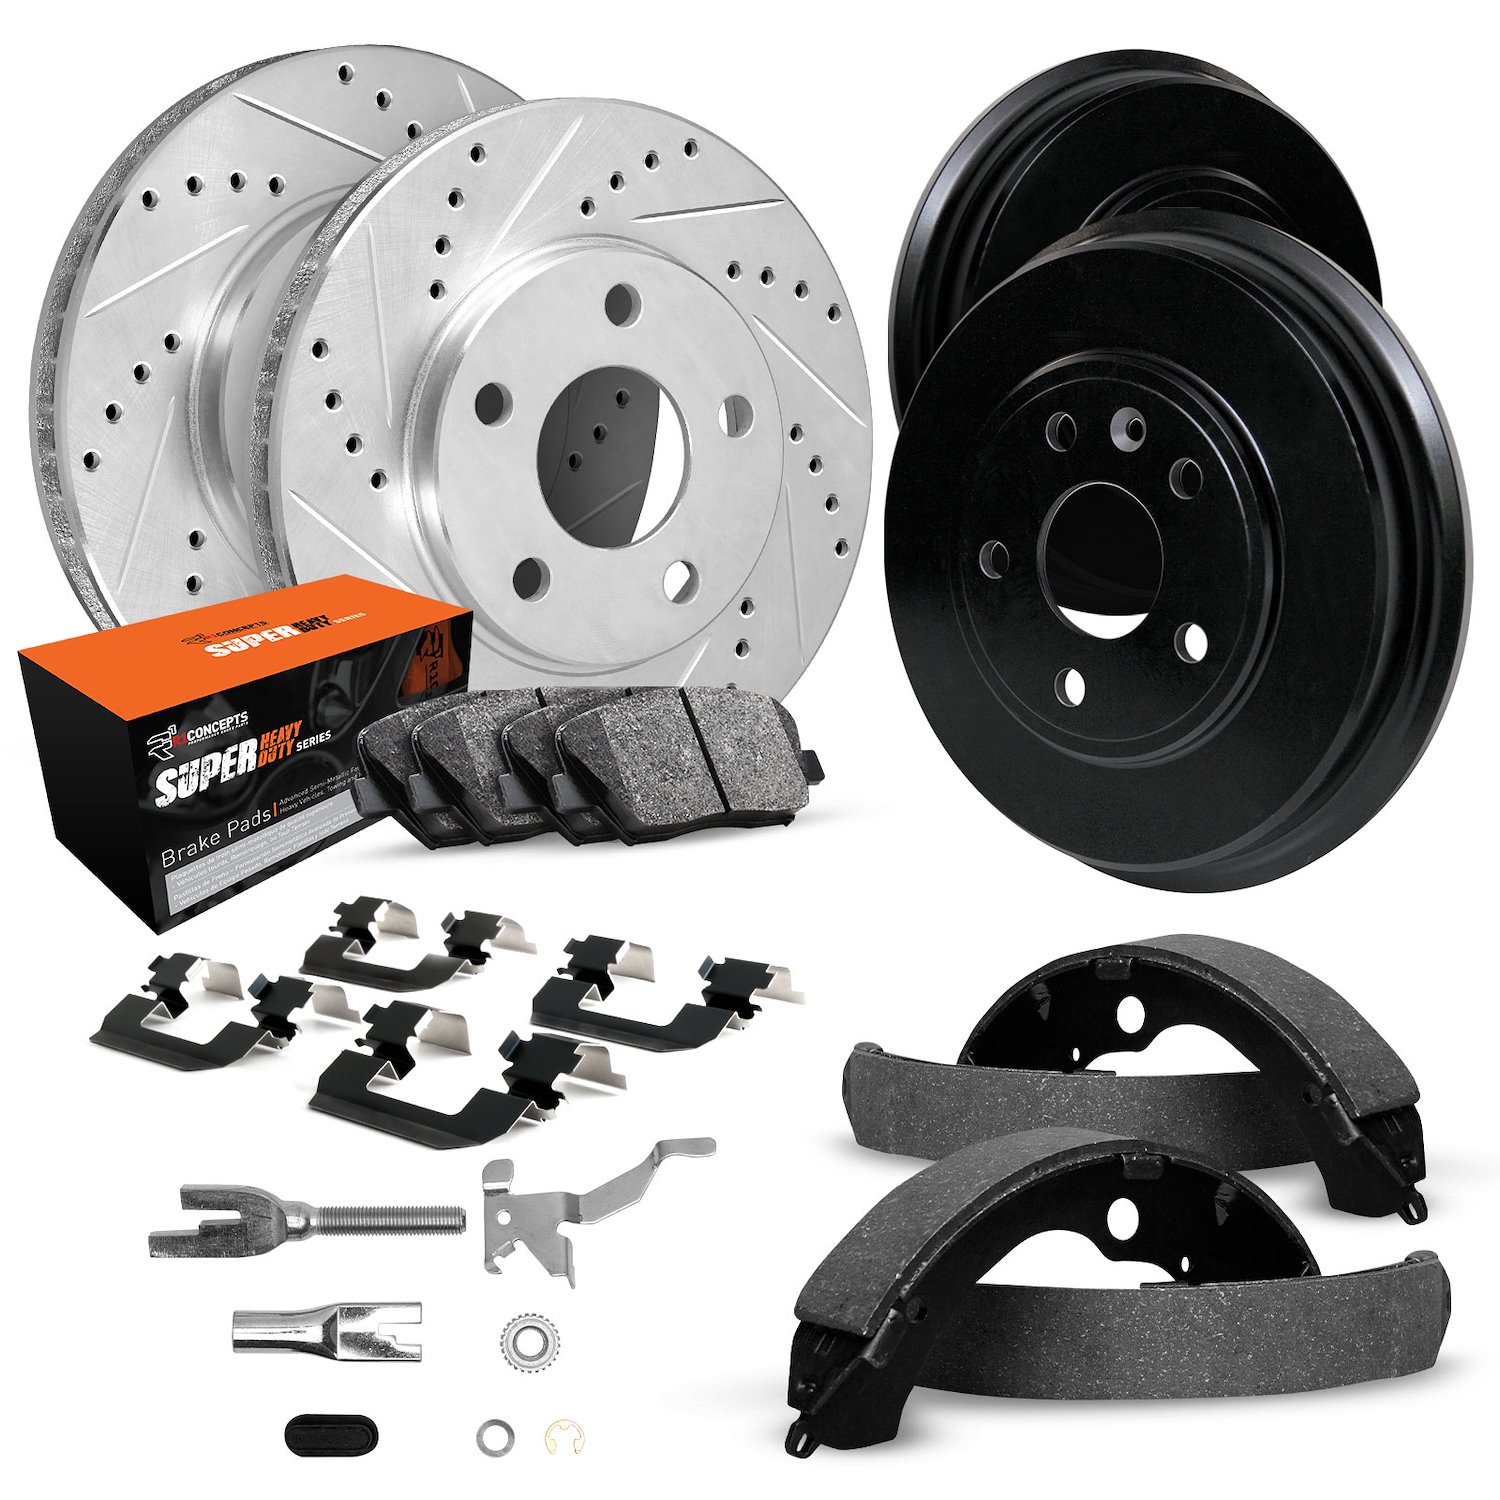 E-Line Drilled/Slotted Silver Rotor & Drum Set w/Super-Duty Pads, Shoes/Hardware/Adjusters, 1986-1989 Ford/Lincoln/Mercury/Mazda